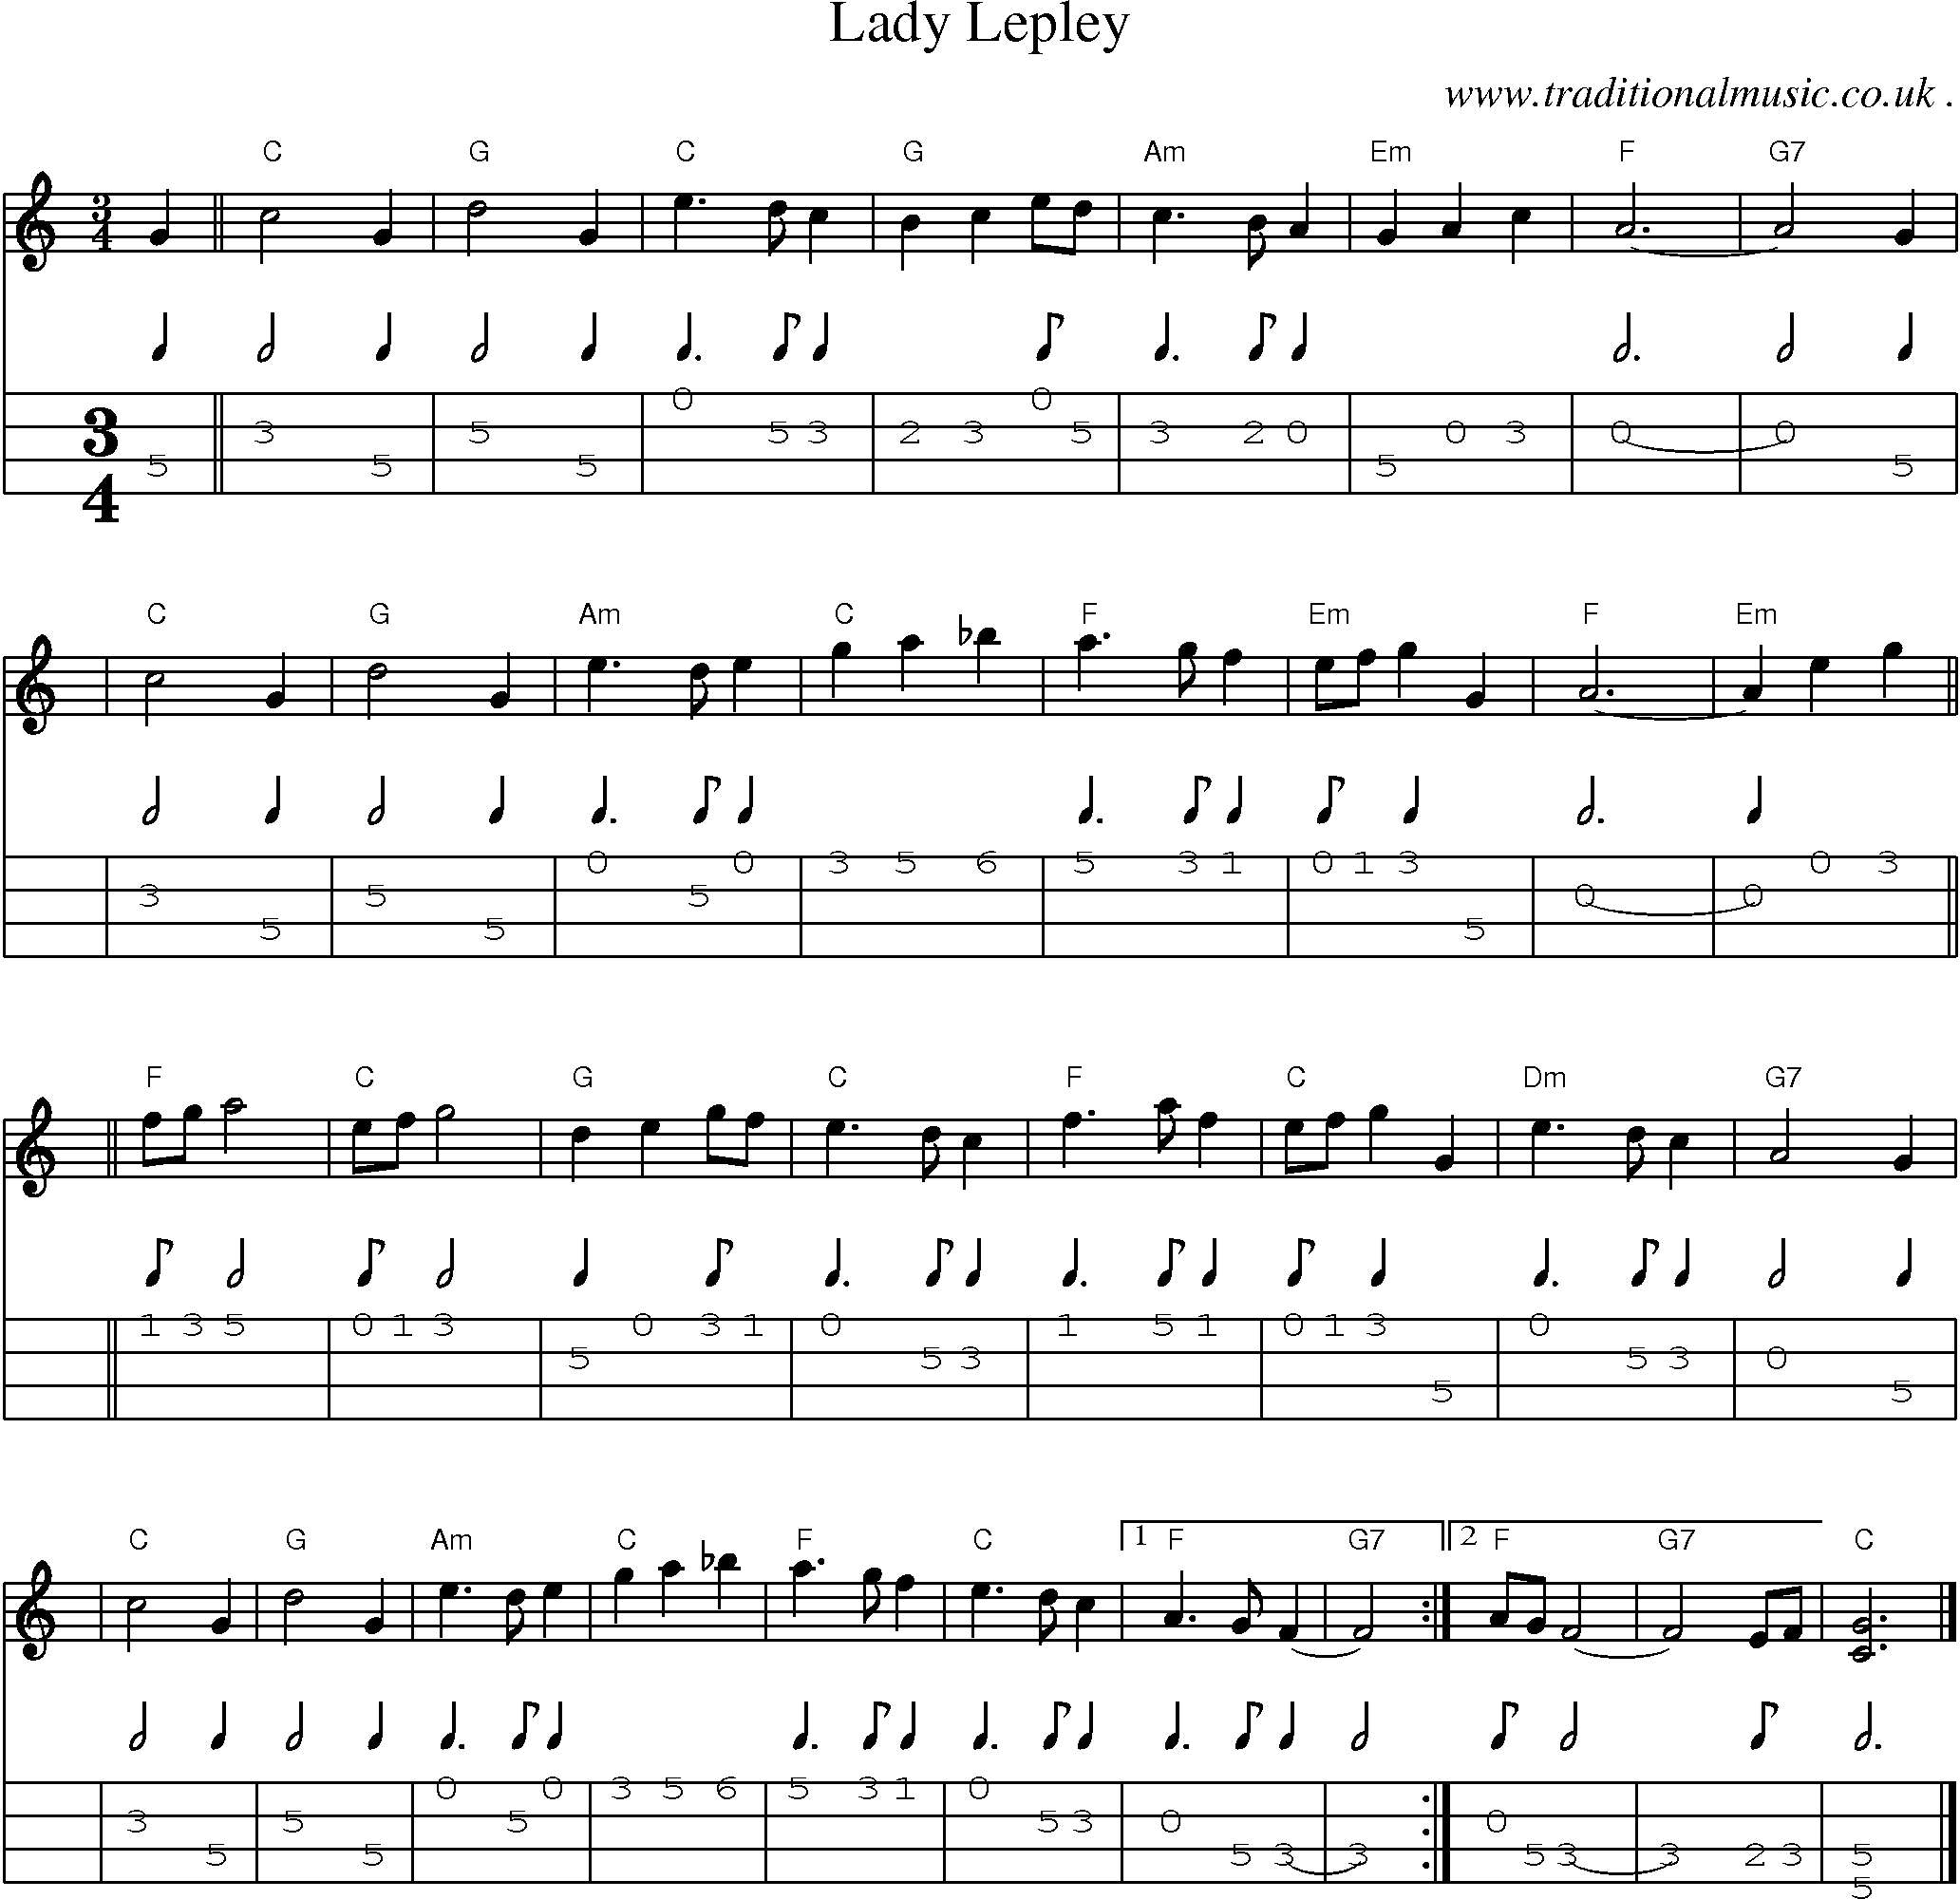 Sheet-music  score, Chords and Mandolin Tabs for Lady Lepley